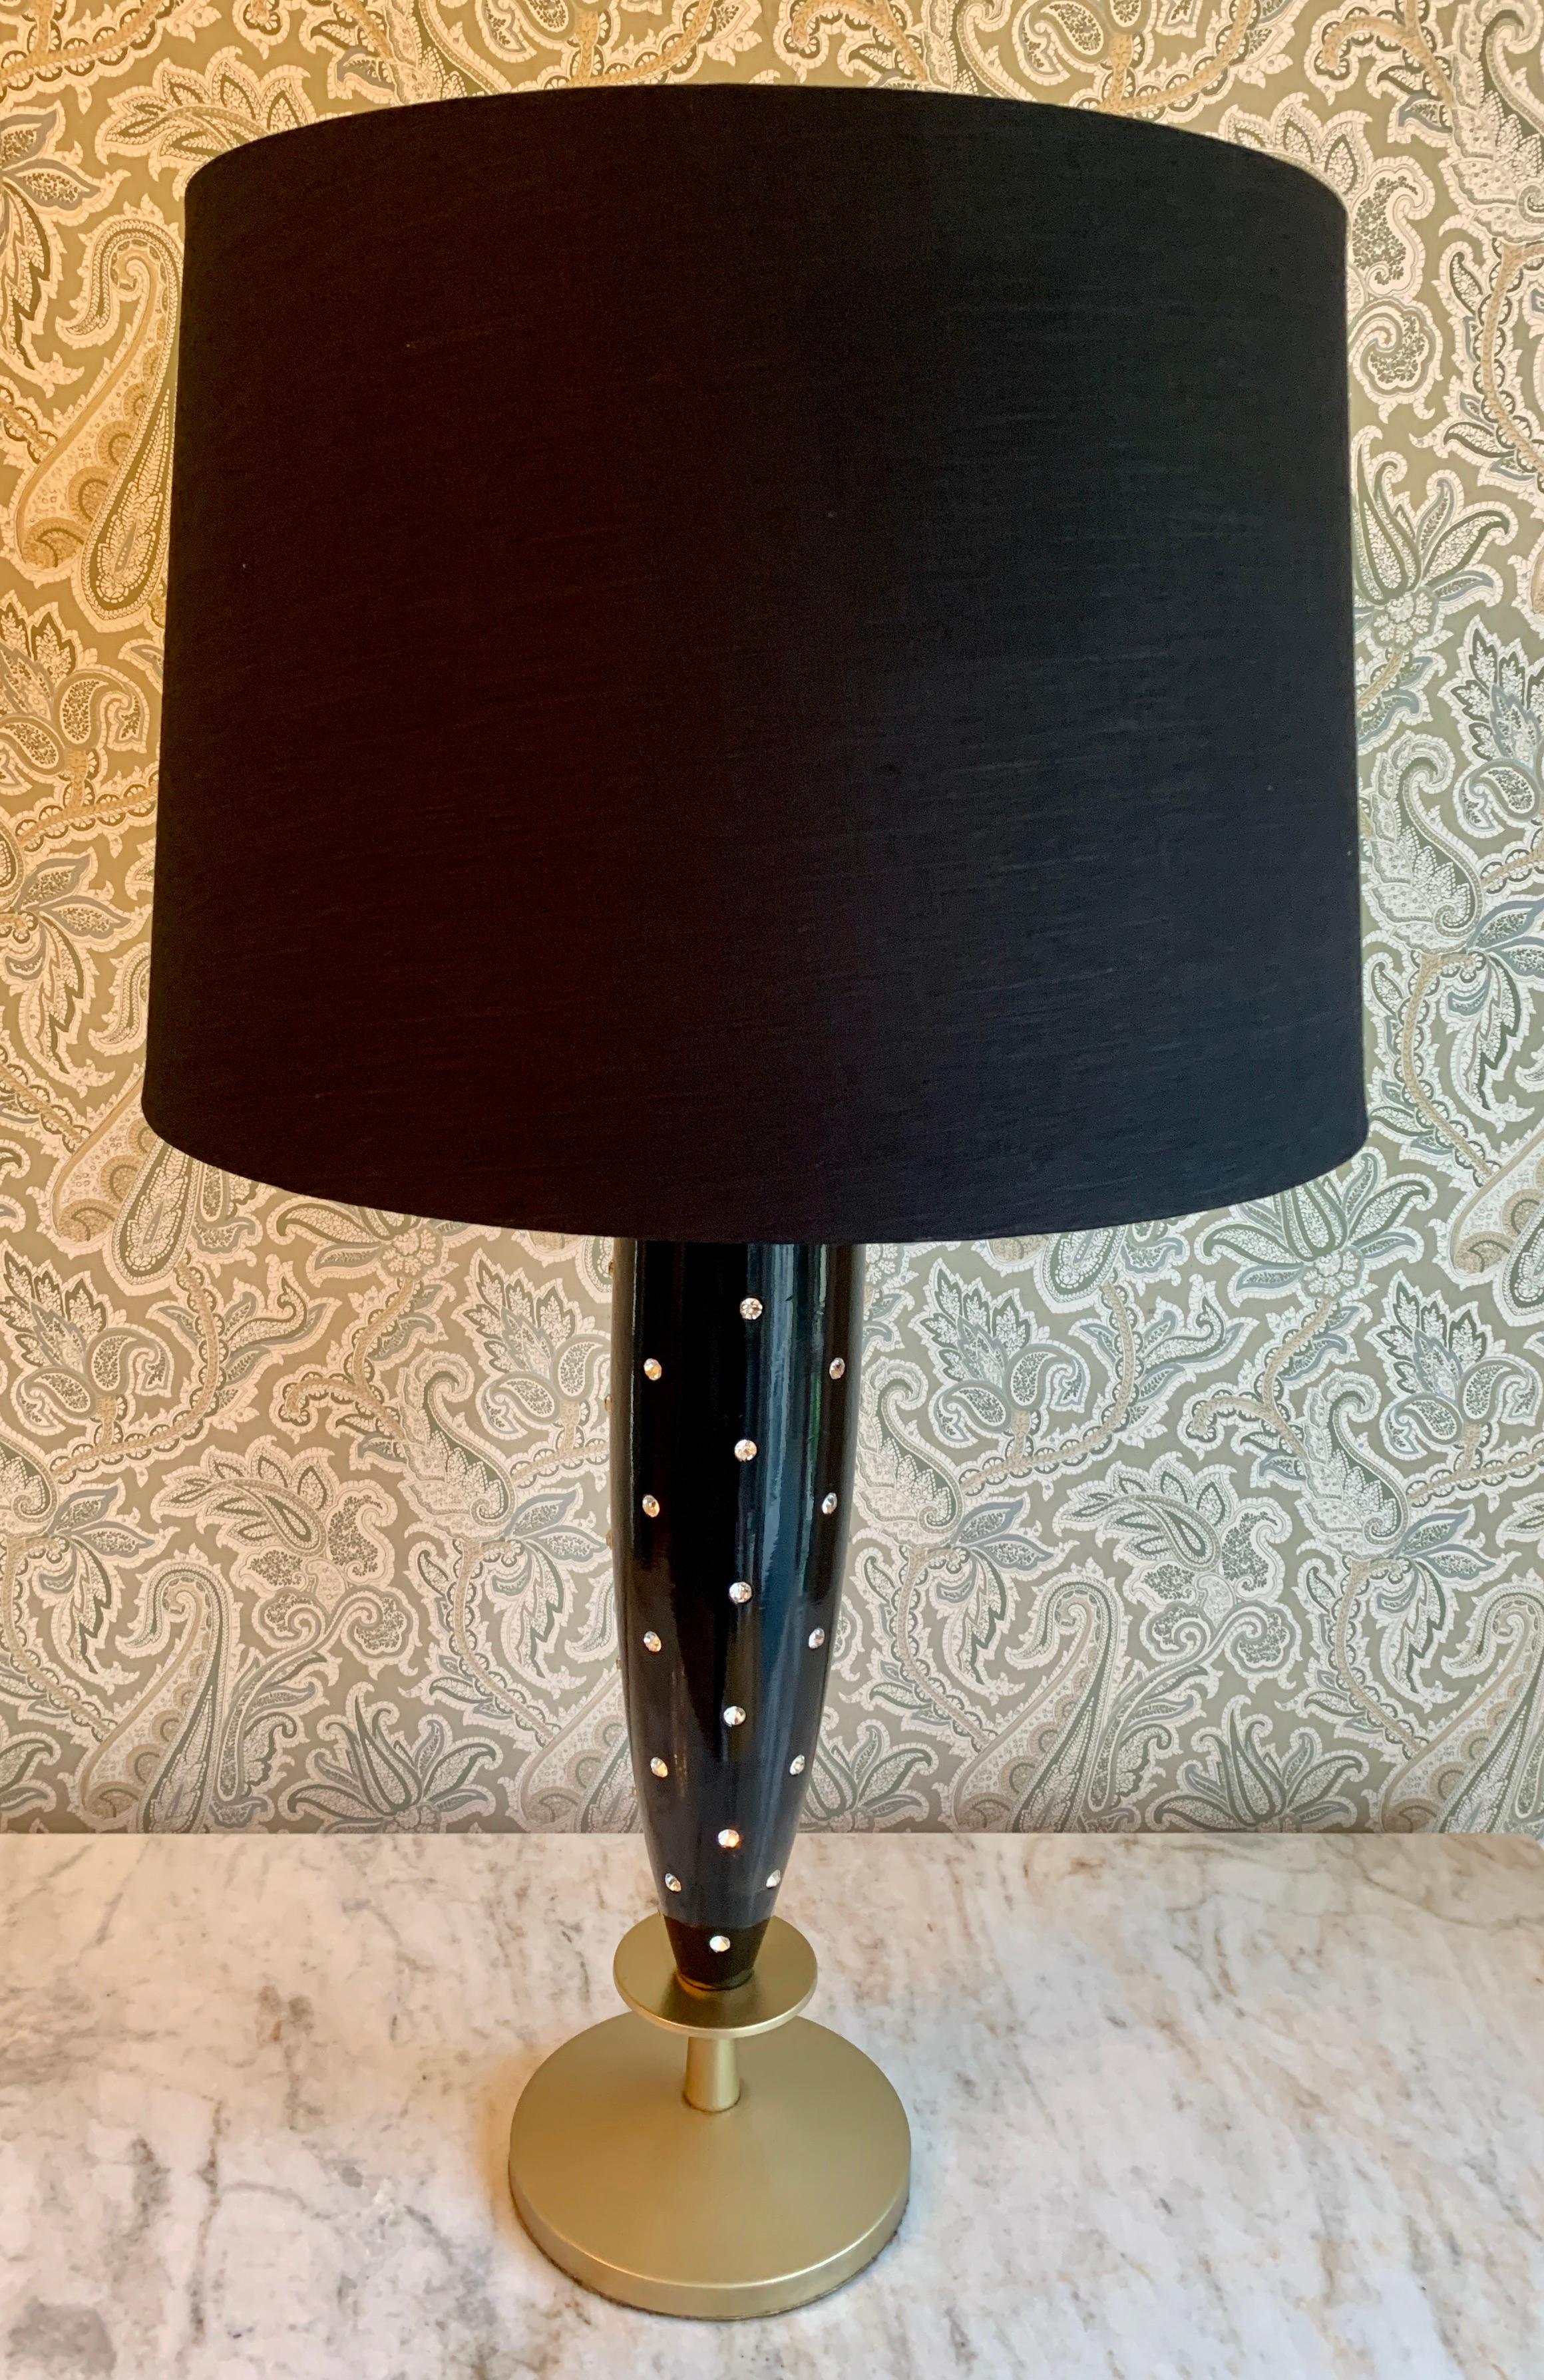 Tommi Parzinger studded lamp with silk shade, this singular lamp is perfectly suited for any individual space, and a compliment to the vanity or dressing area, especially due to the sexy large diamond like studs in the black lacquer base.

The